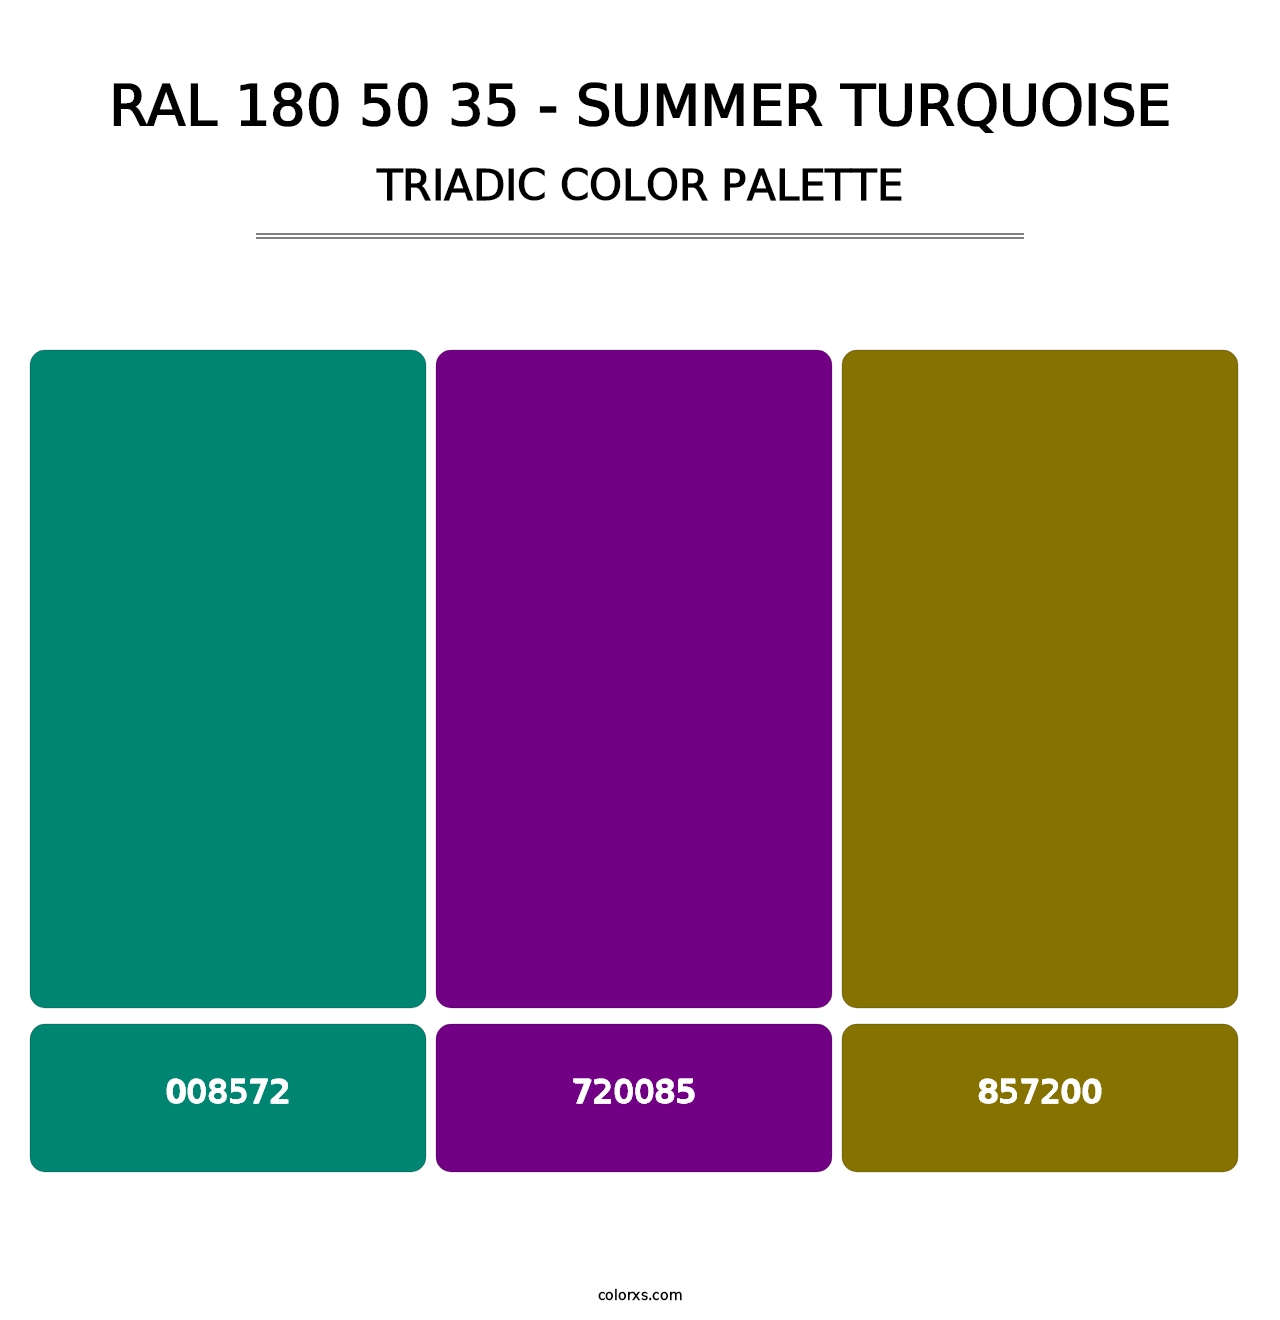 RAL 180 50 35 - Summer Turquoise - Triadic Color Palette